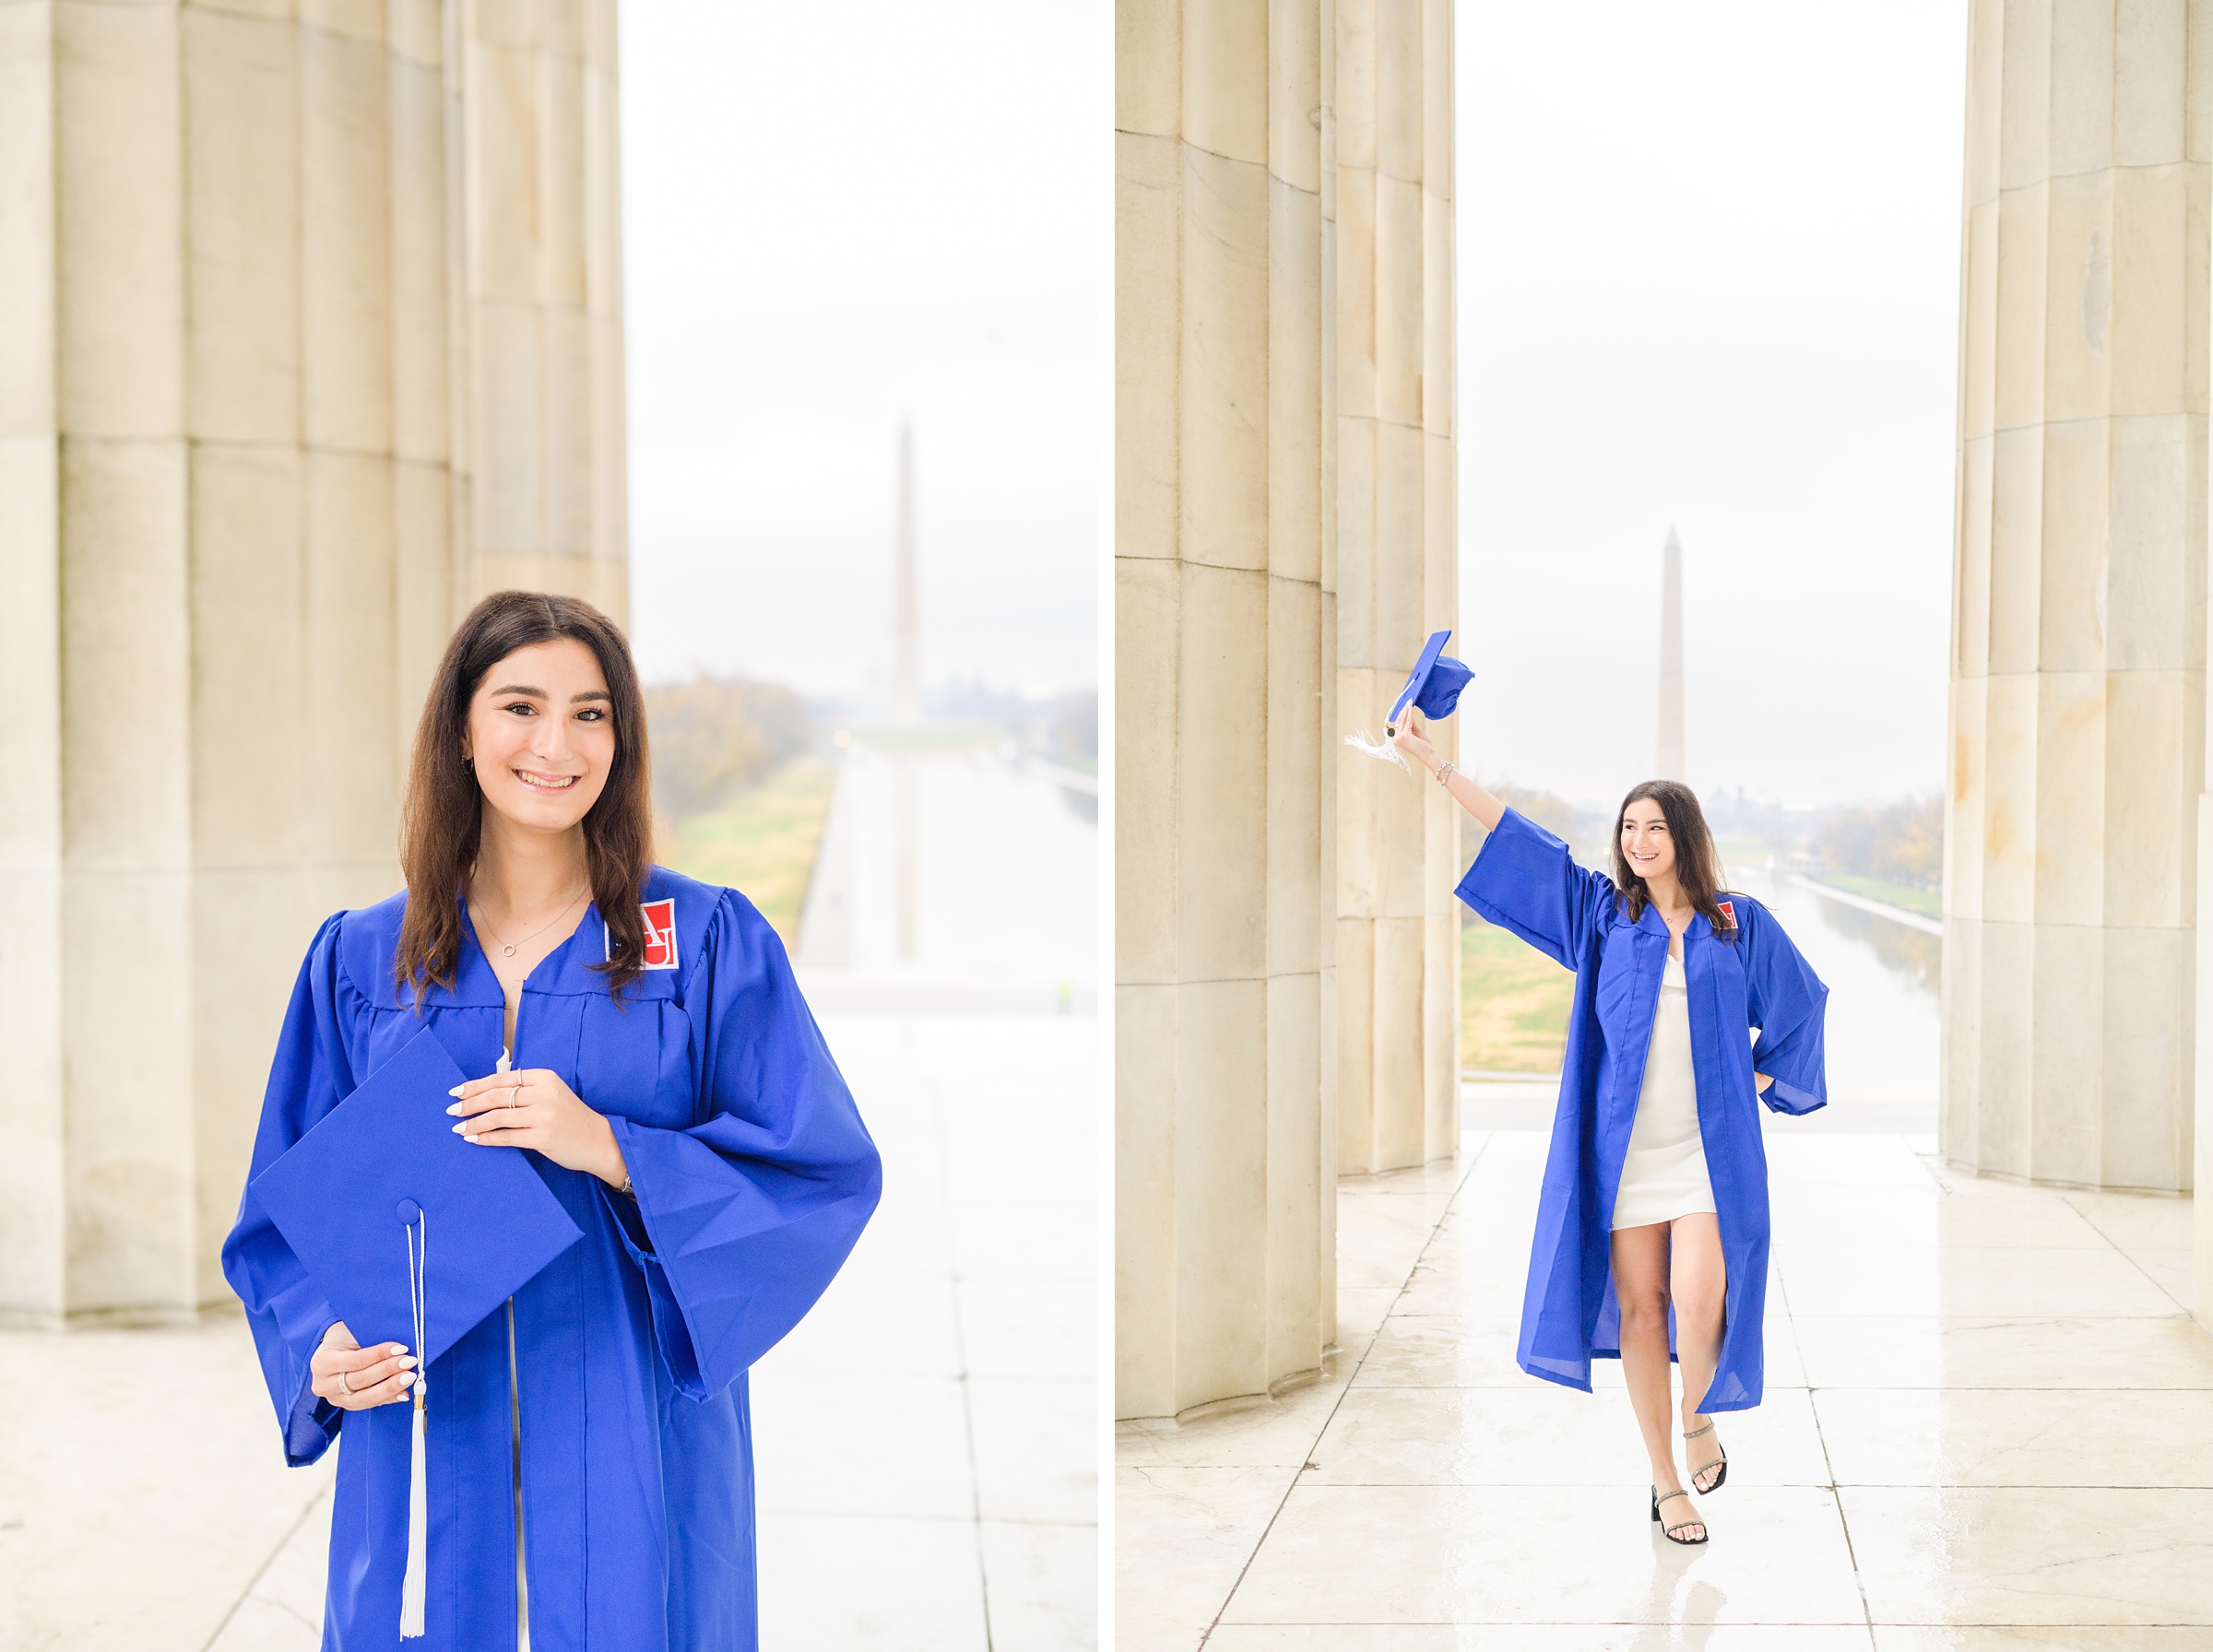 American University senior poses at the Lincoln Memorial in graduation attire during Washington DC Grad Session photographed by Cait Kramer